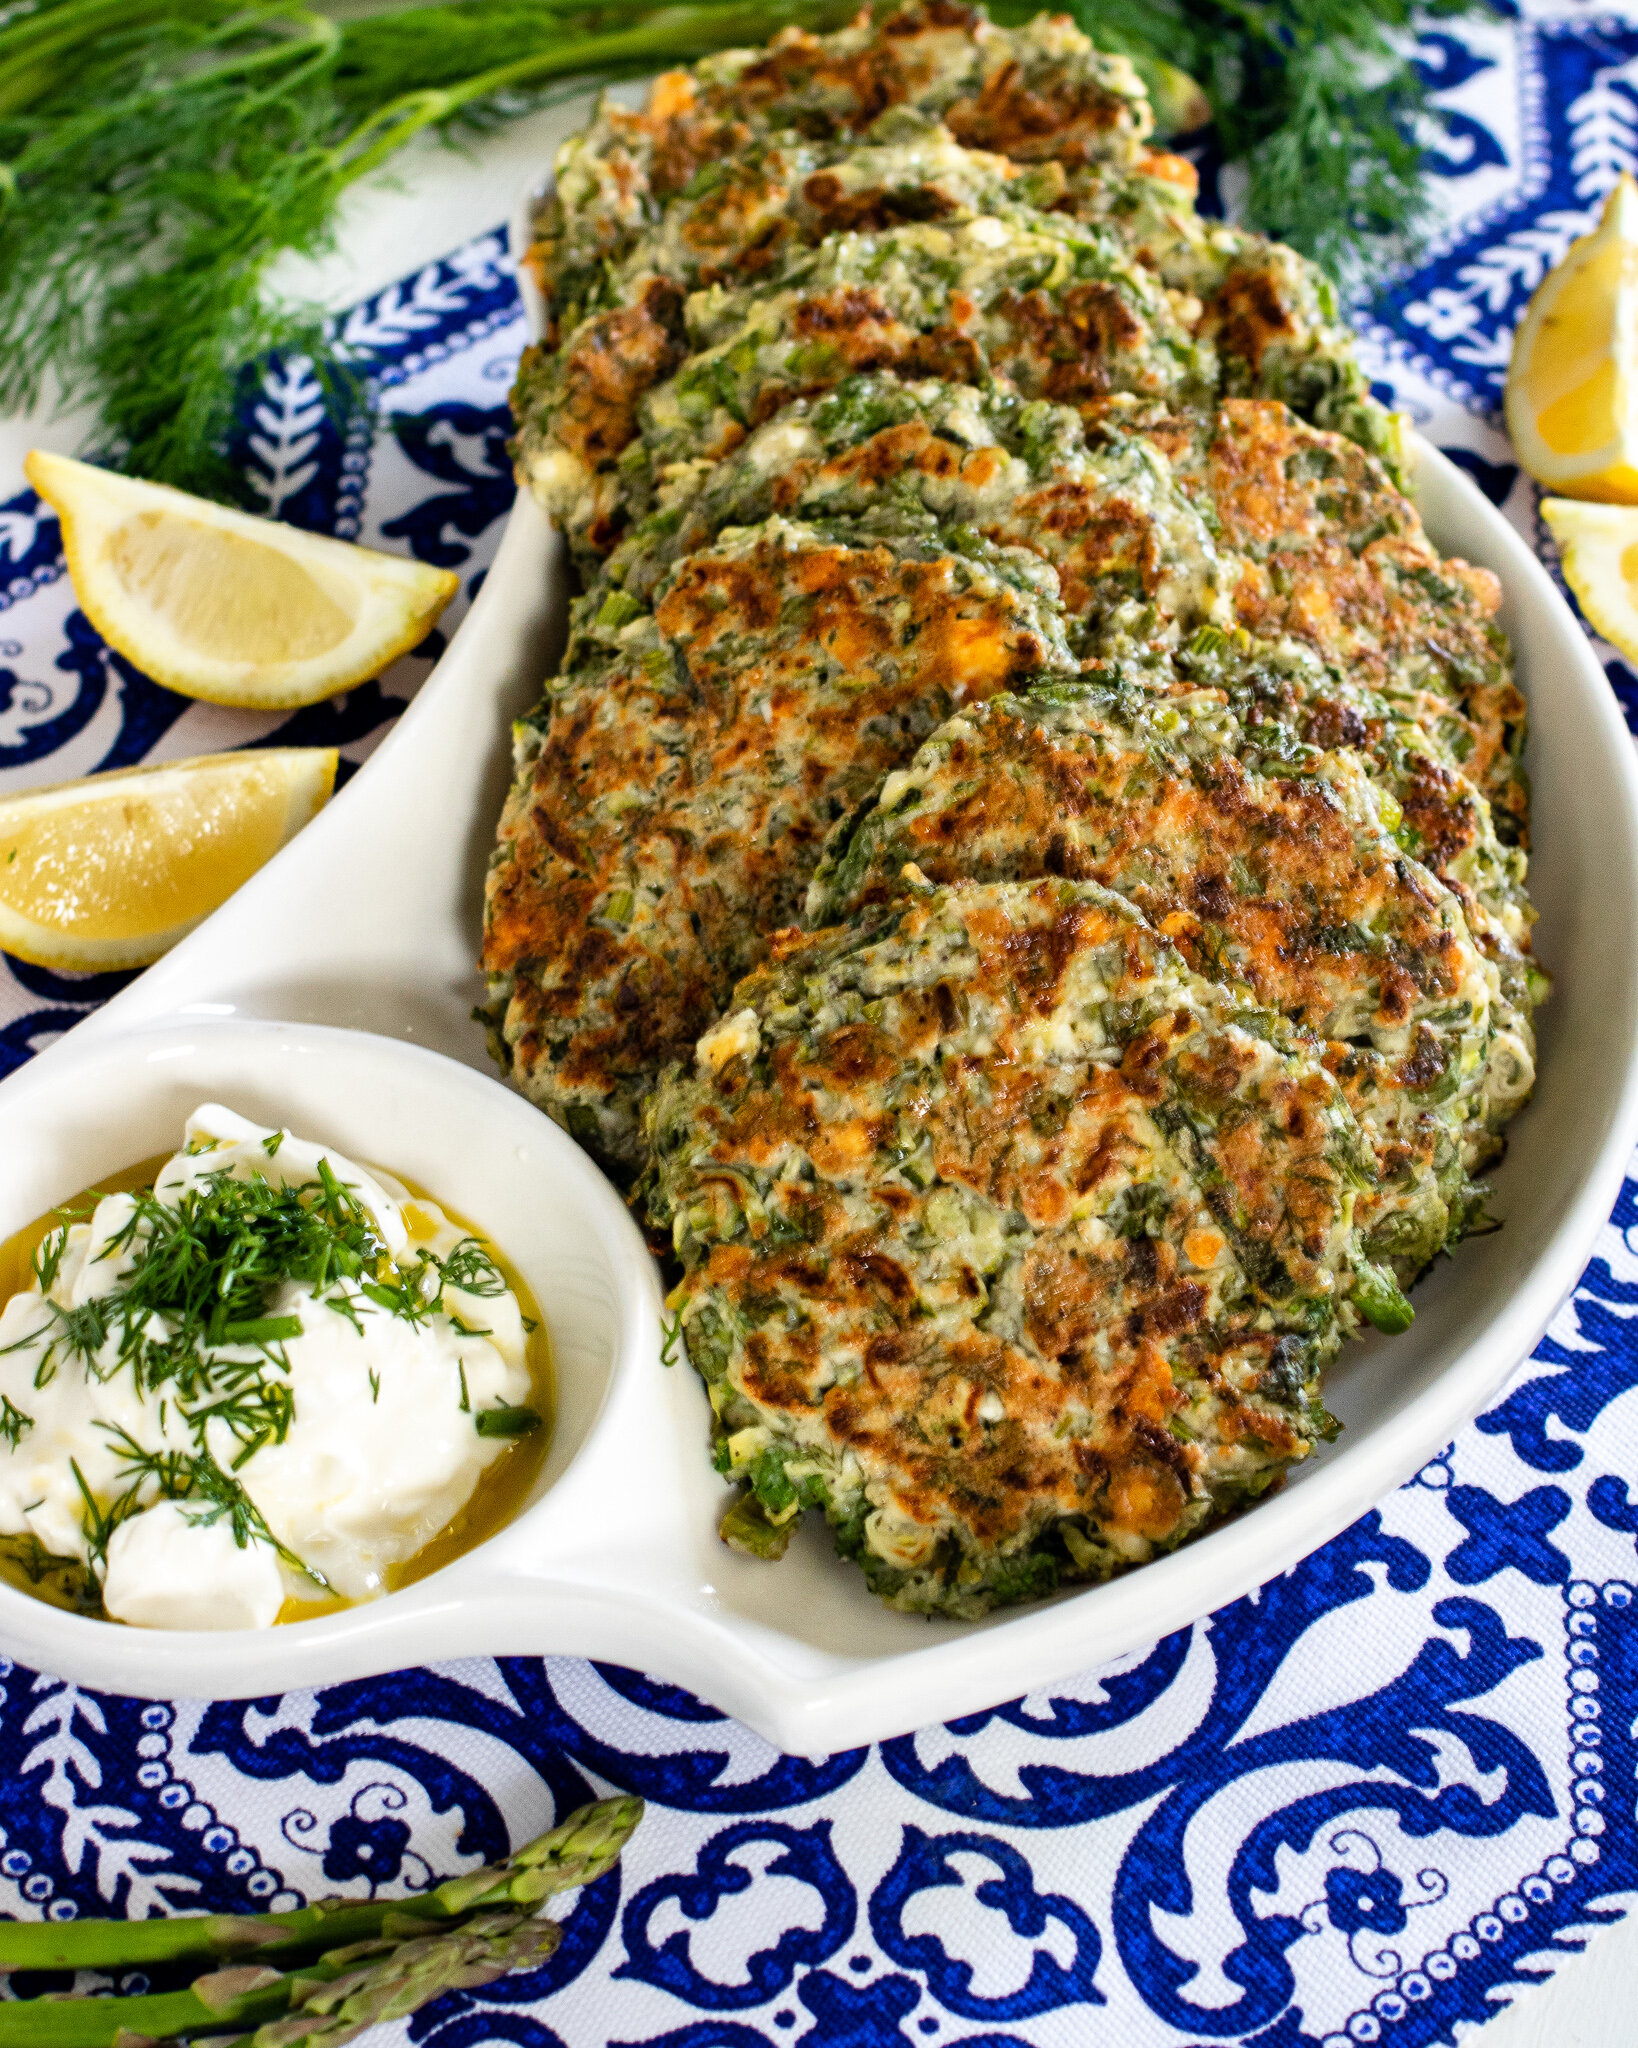 Greek Appetisers | Zucchini Fritters and Cheese Pies | $35 AUD per person